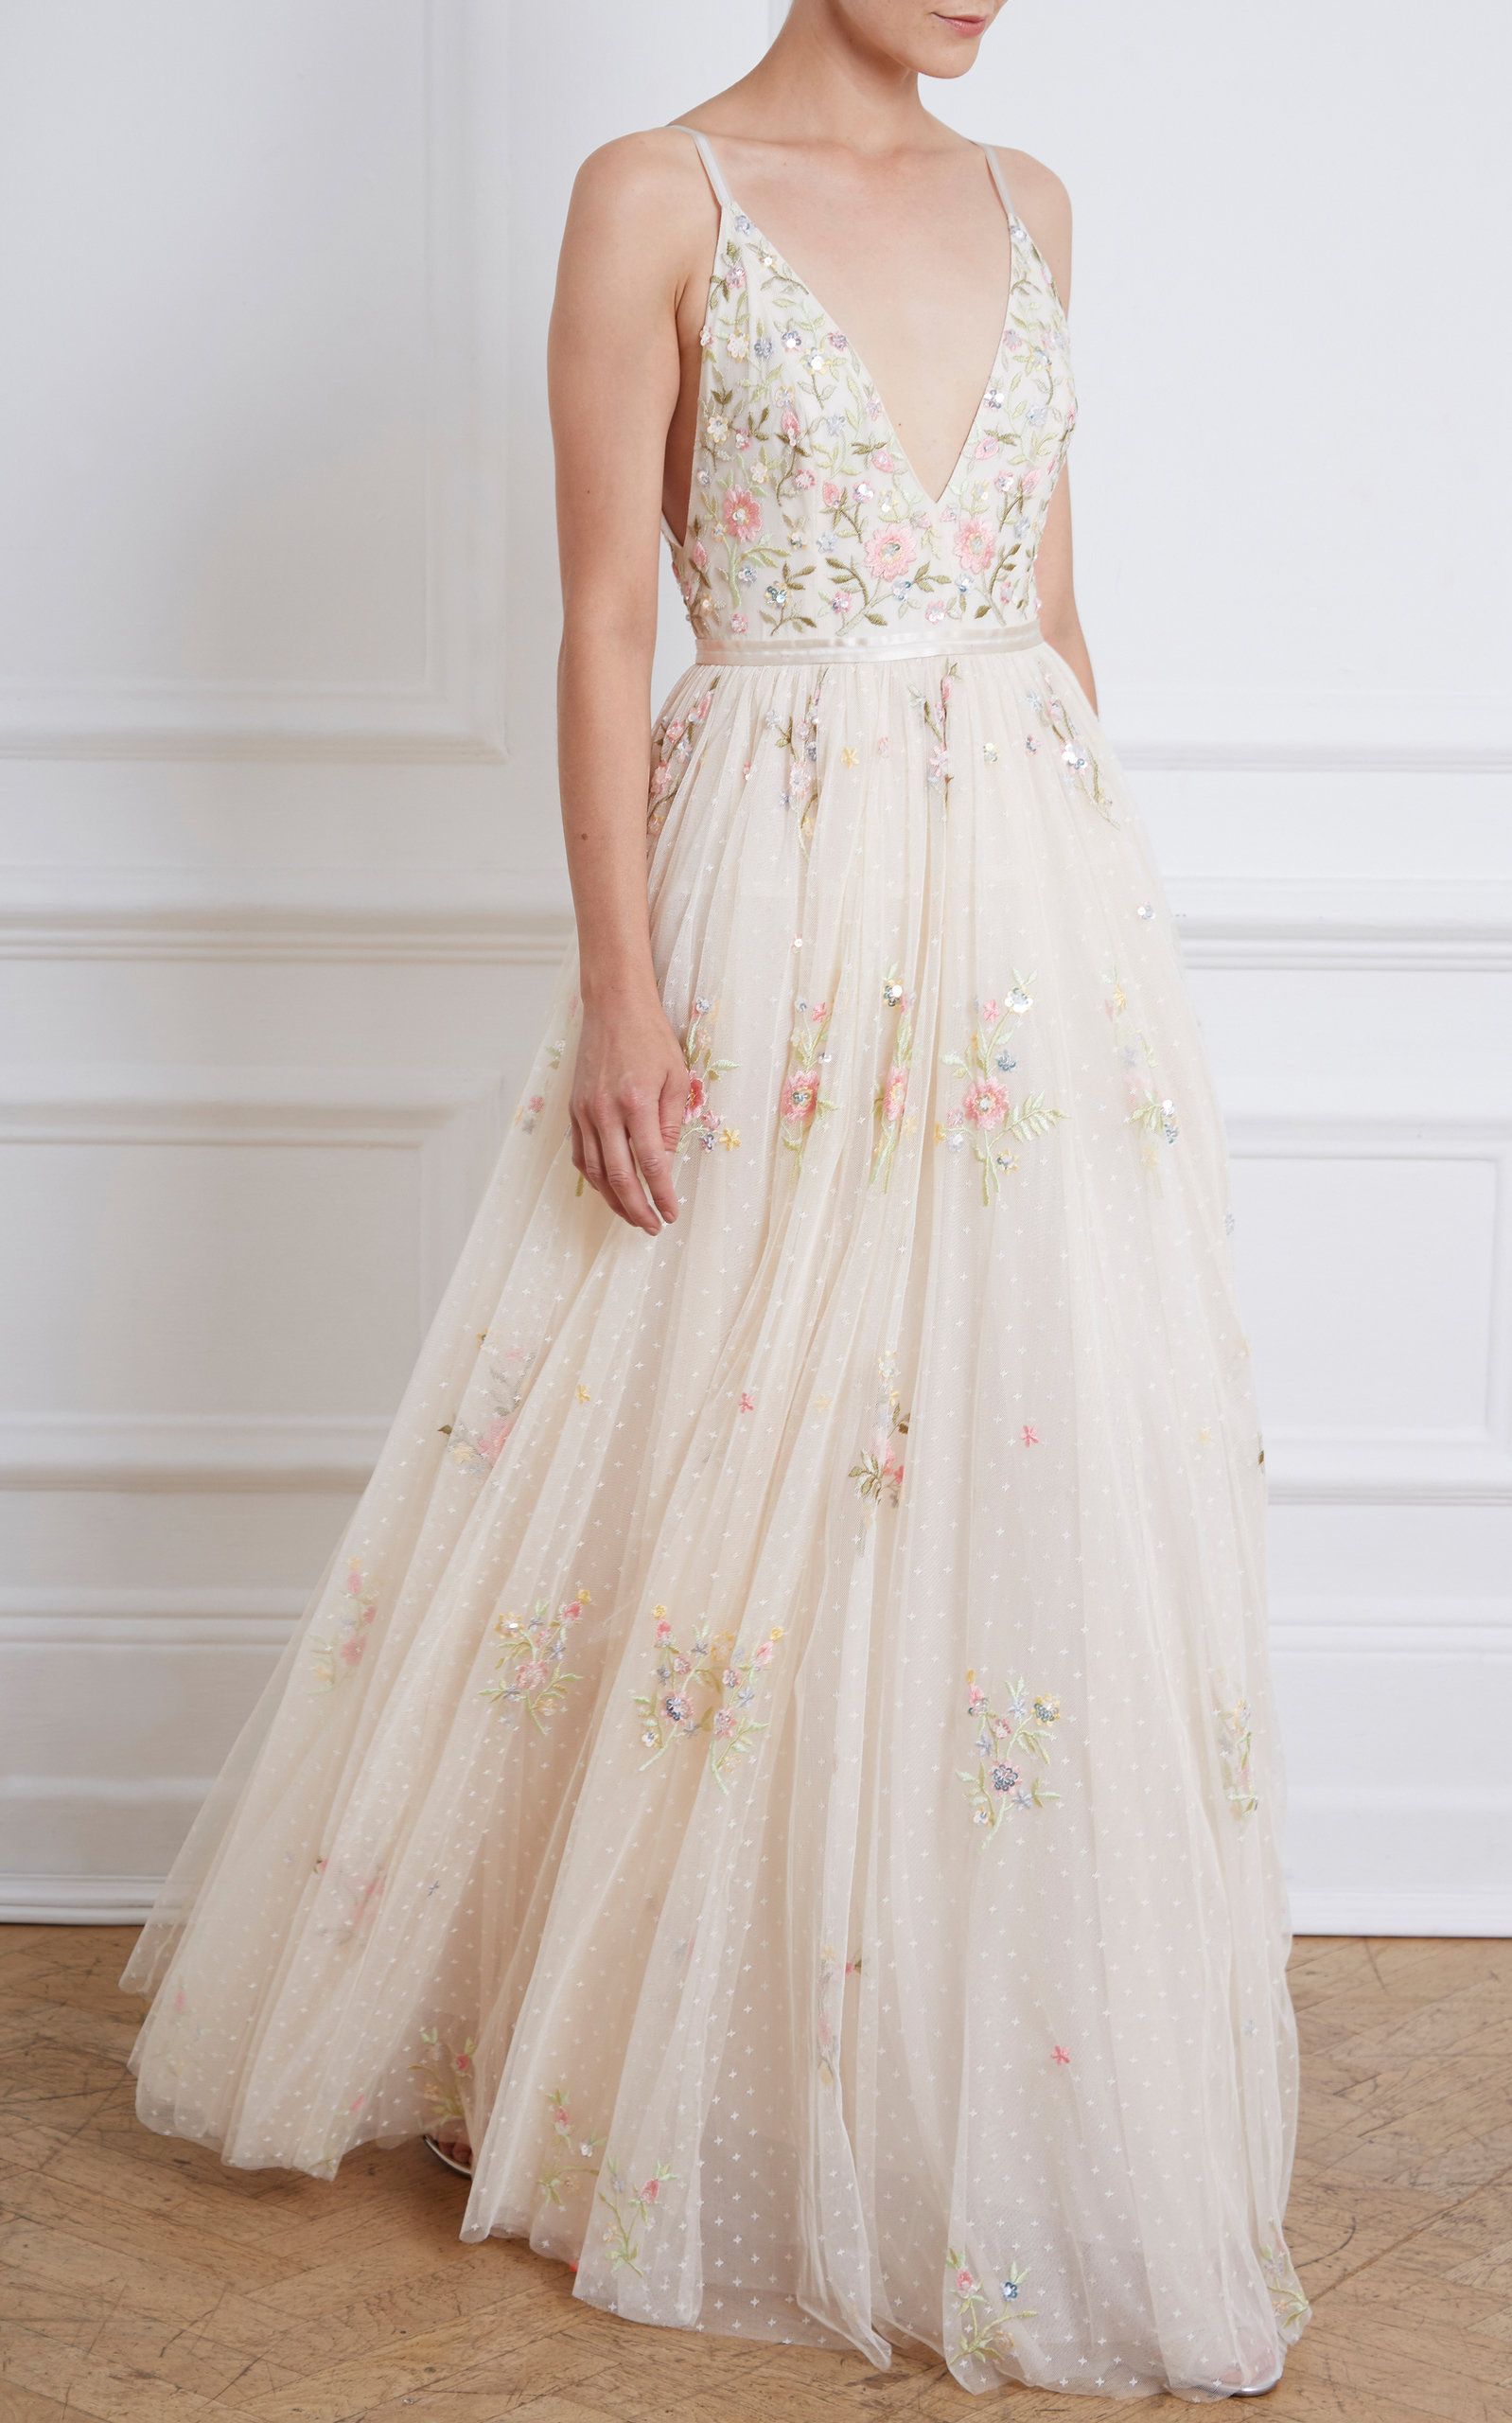 Petunia Floral-Embroidered Tulle Gown  by Needle & Thread | Moda Operandi - Petunia Floral-Embroidered Tulle Gown  by Needle & Thread | Moda Operandi -   16 beauty Dresses floral ideas